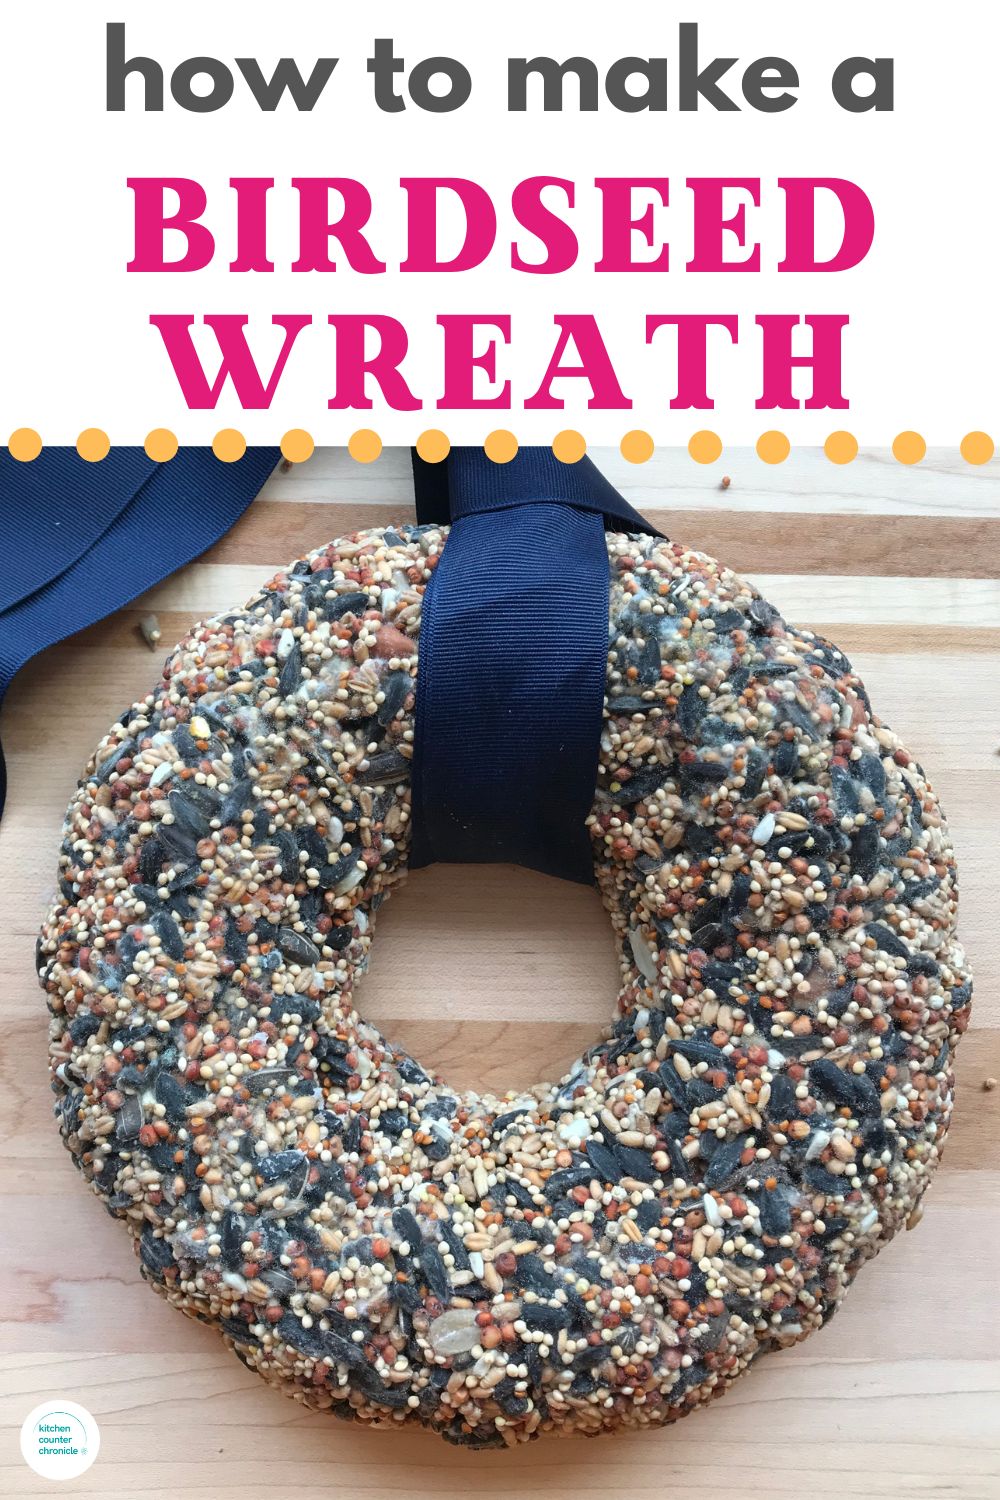 title "how to make a birdseed wreath" with image of a large birdseed wreath wrapped with blue ribbon resting on wooden table.